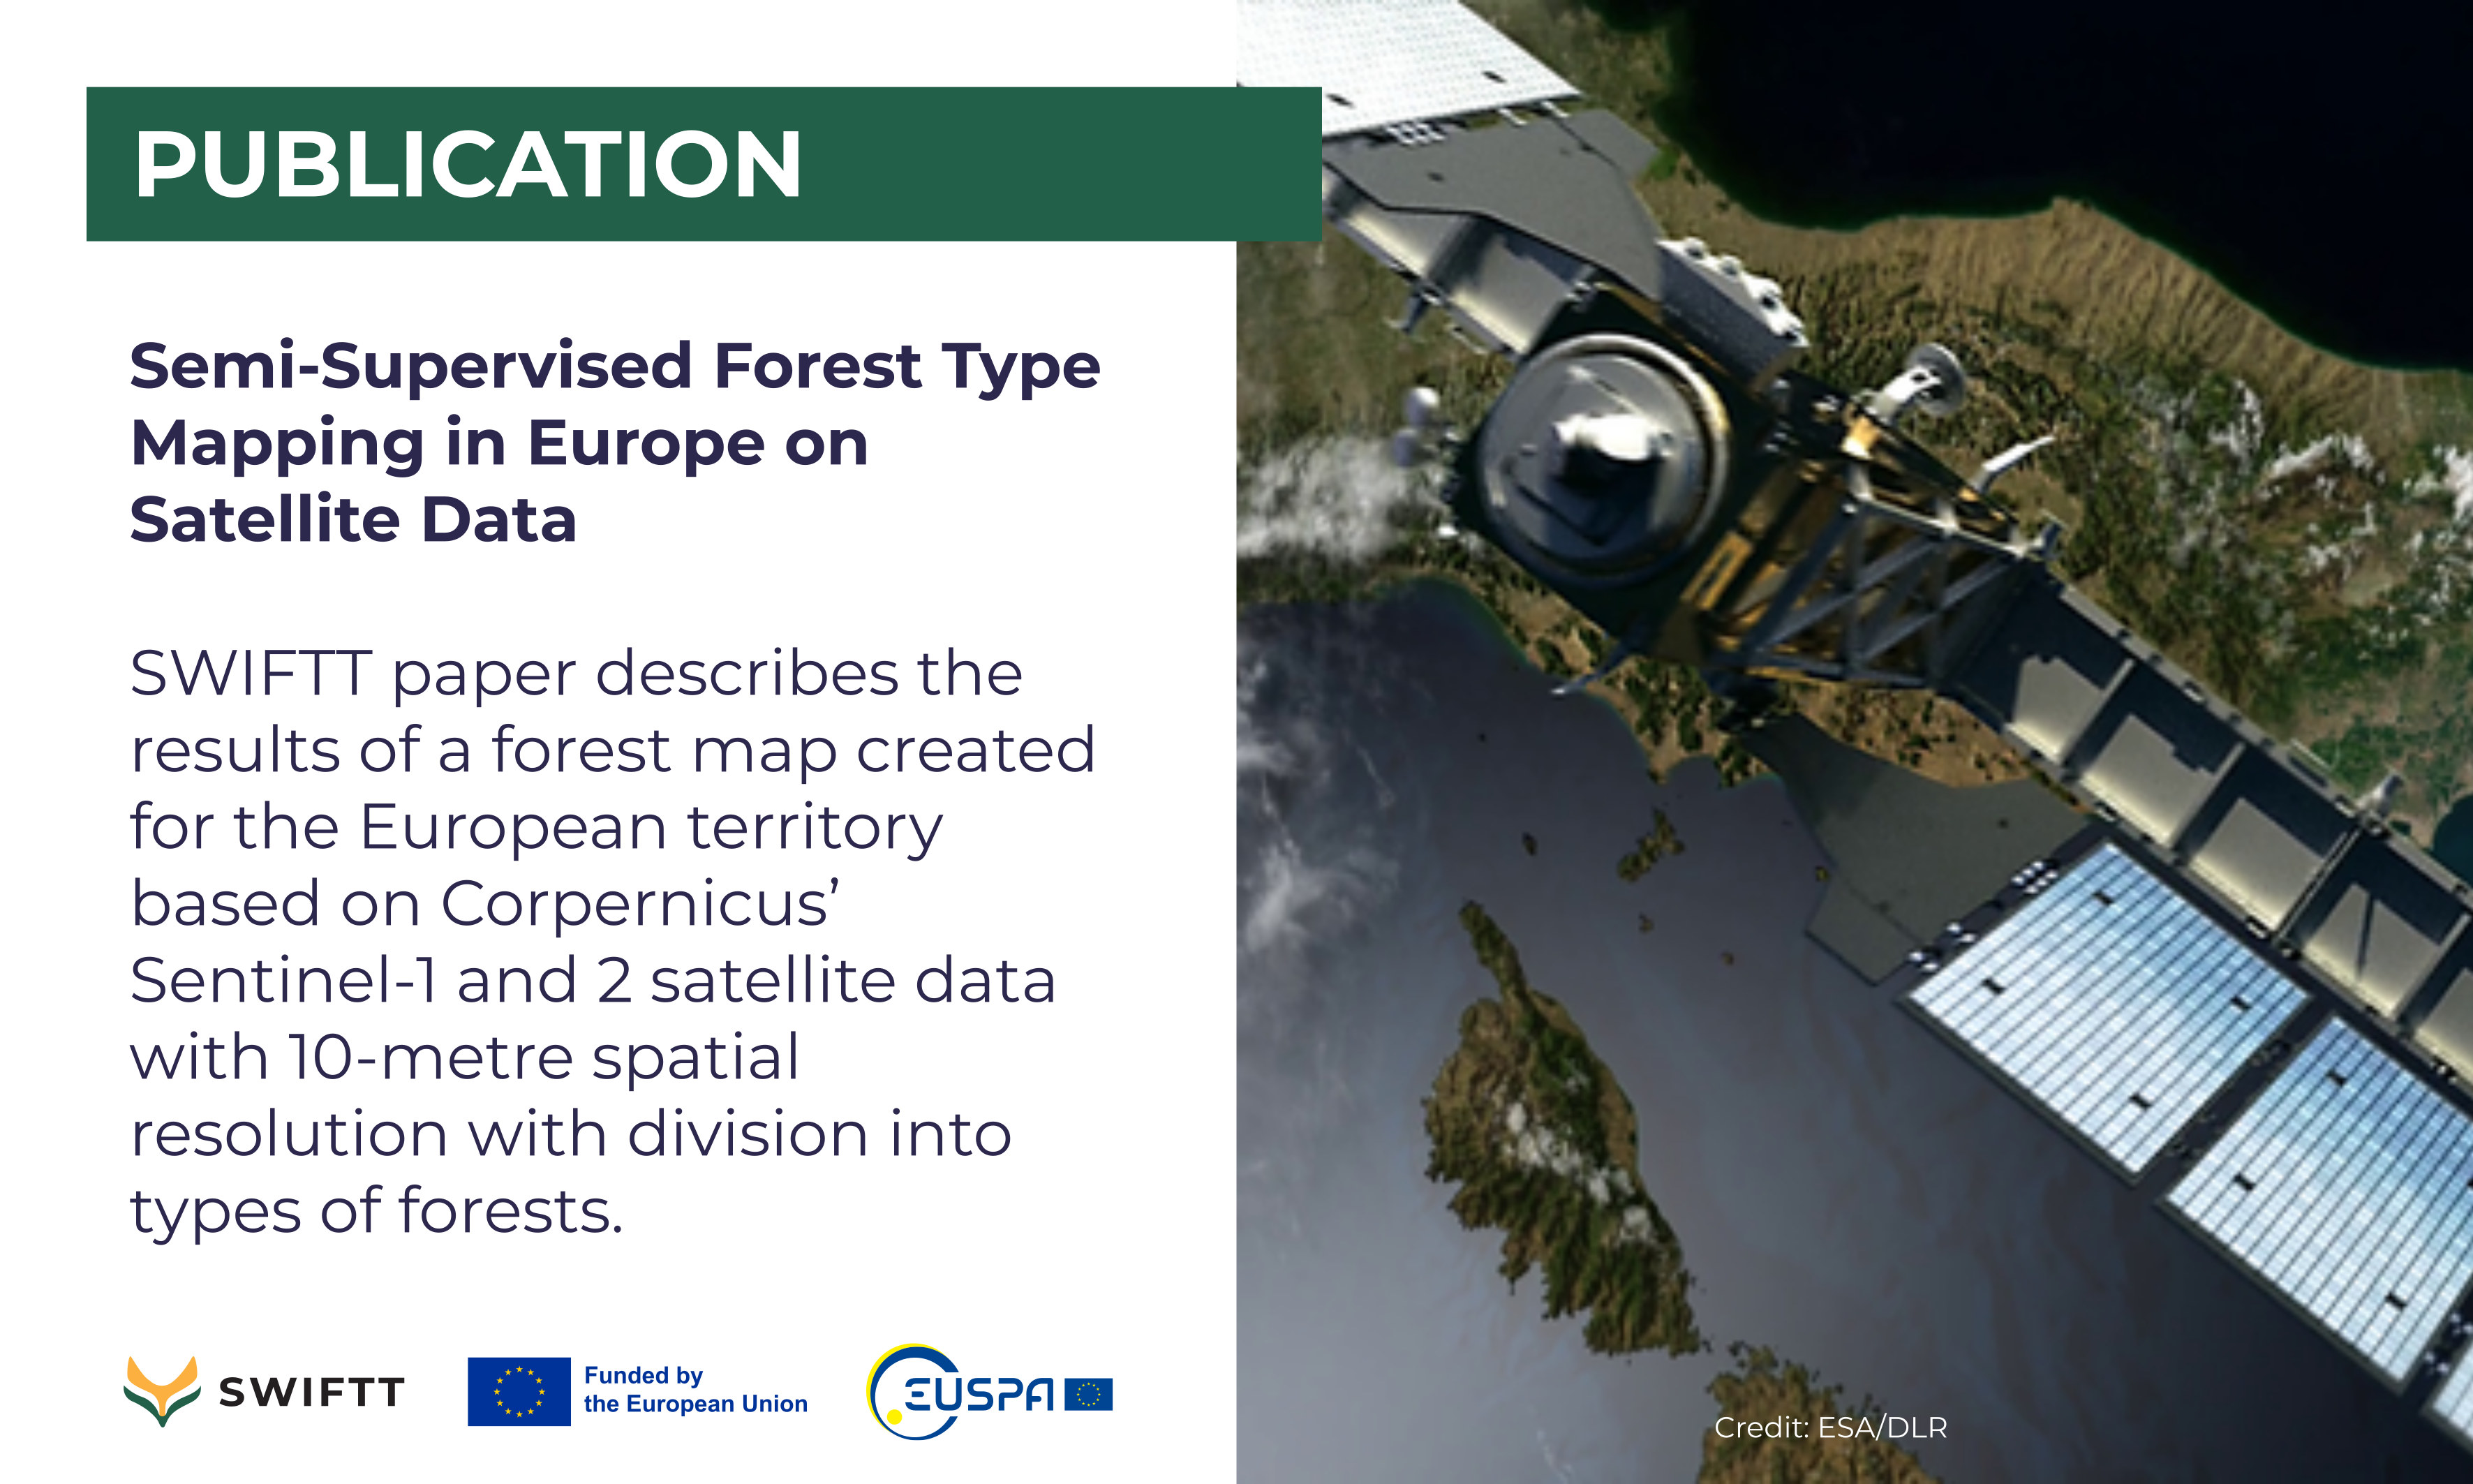 Publication: Semi-Supervised Forest Type Mapping in Europe on Satellite Data